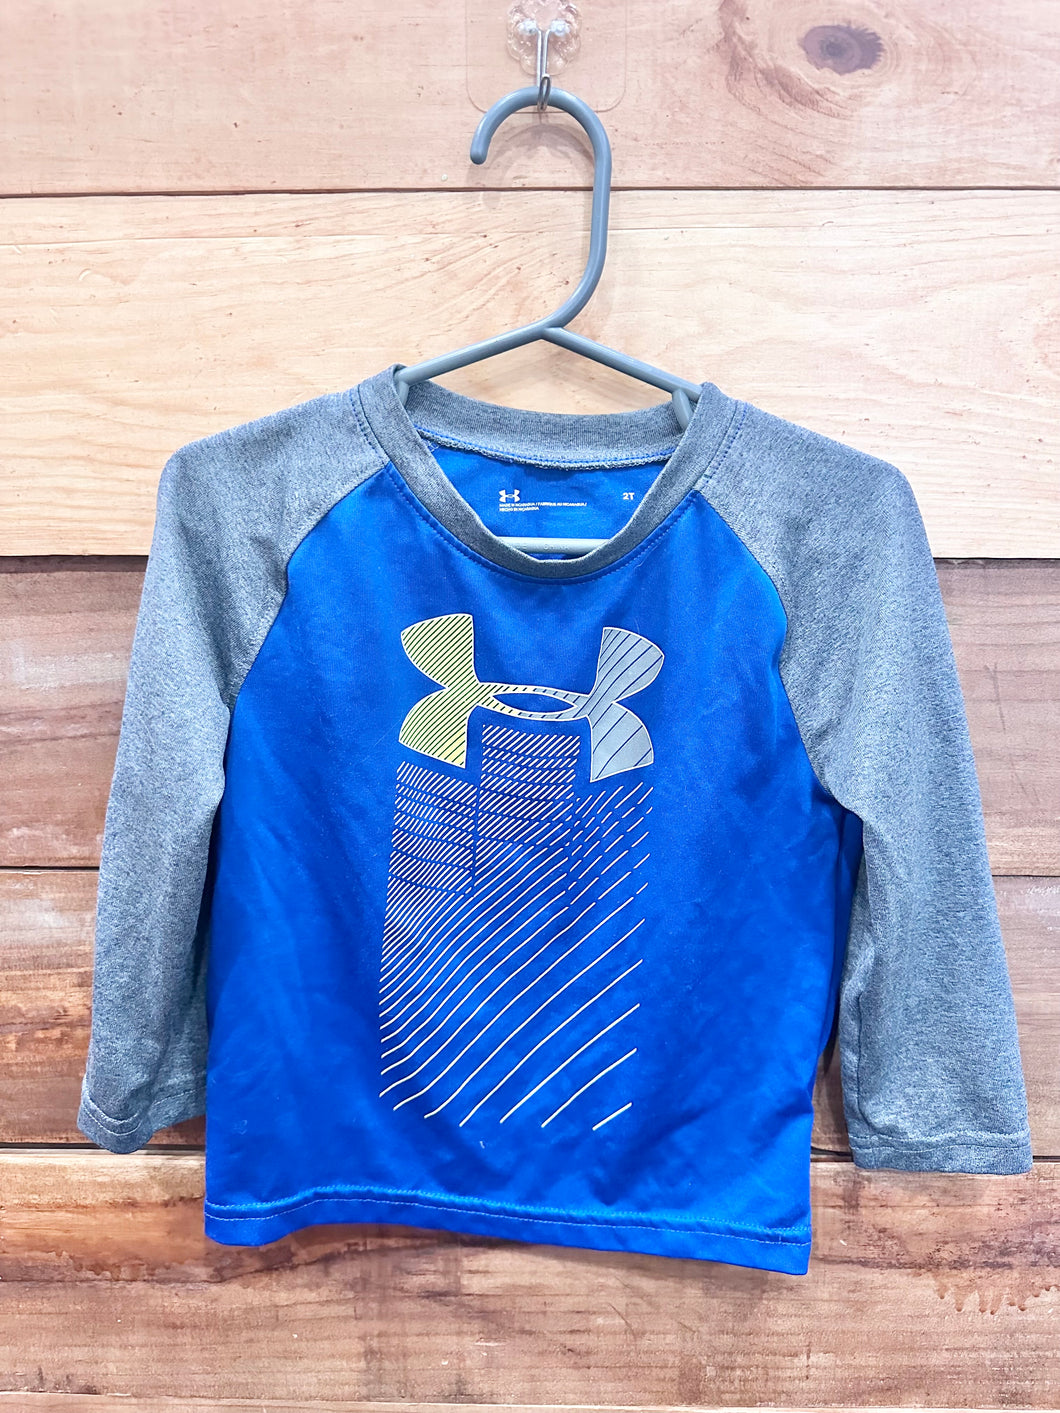 Under Armour Blue & Gray Shirt Size 2T